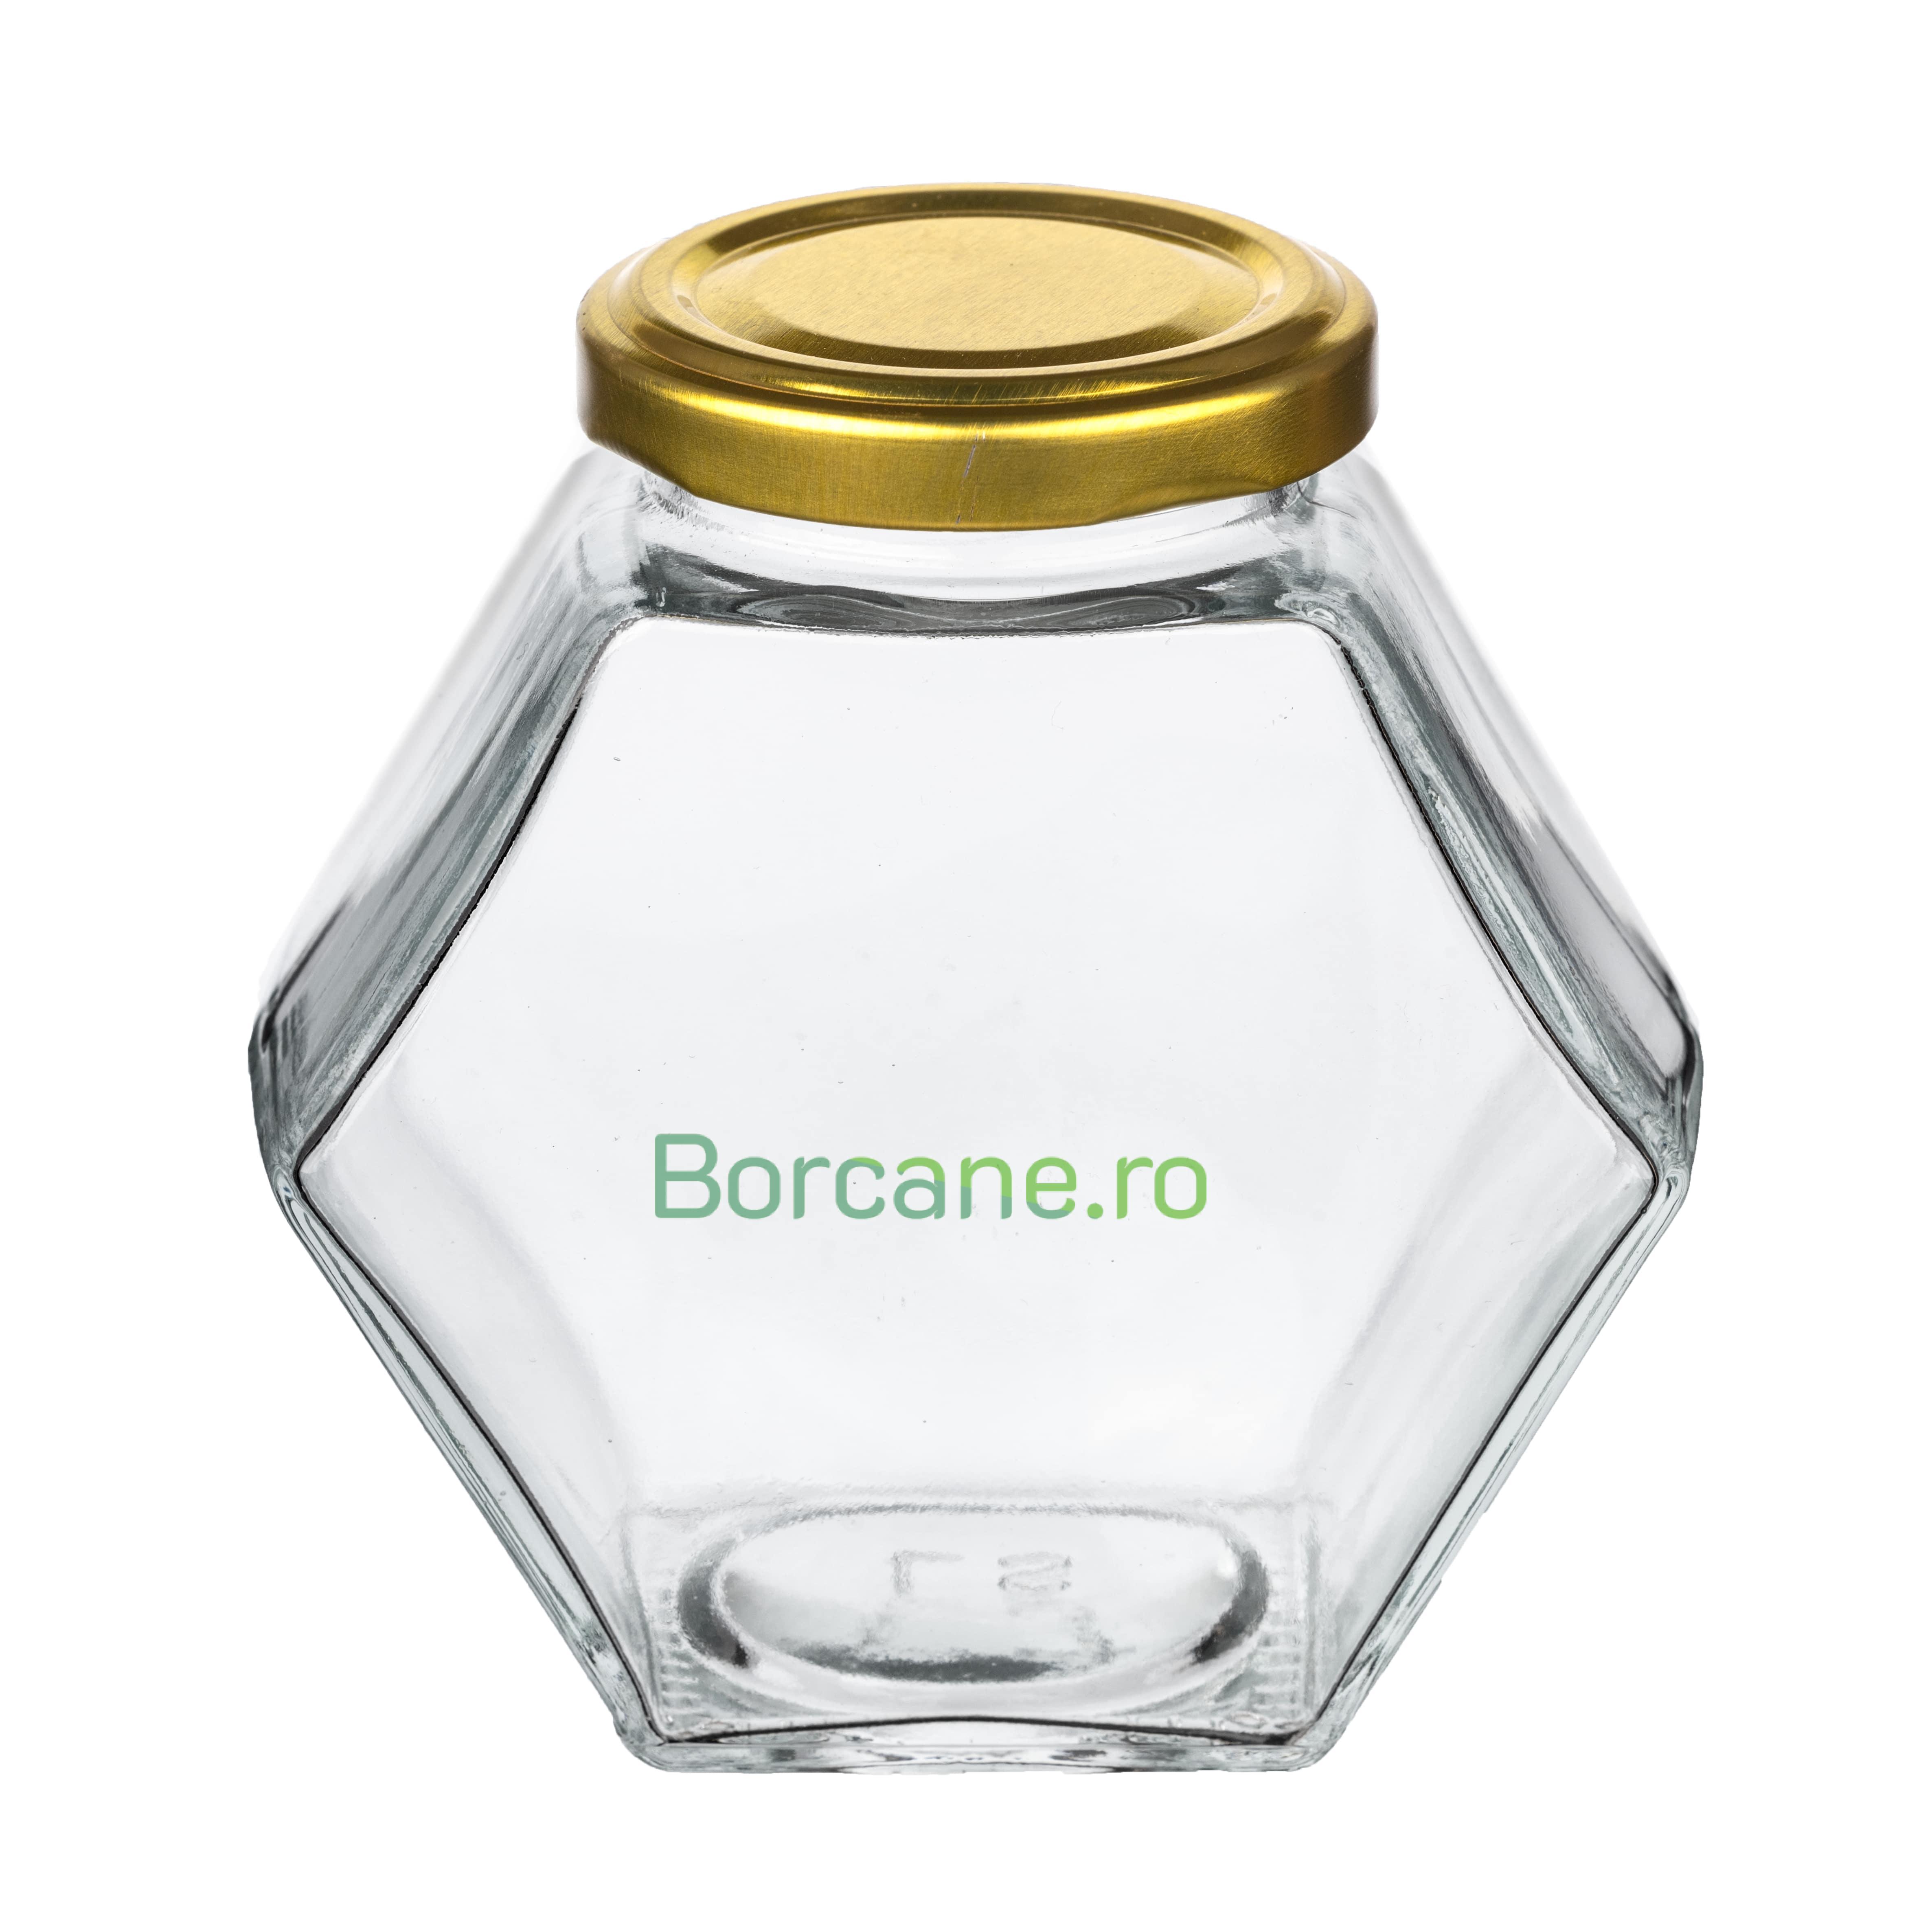 Borcan 280 ml Miere TO 53